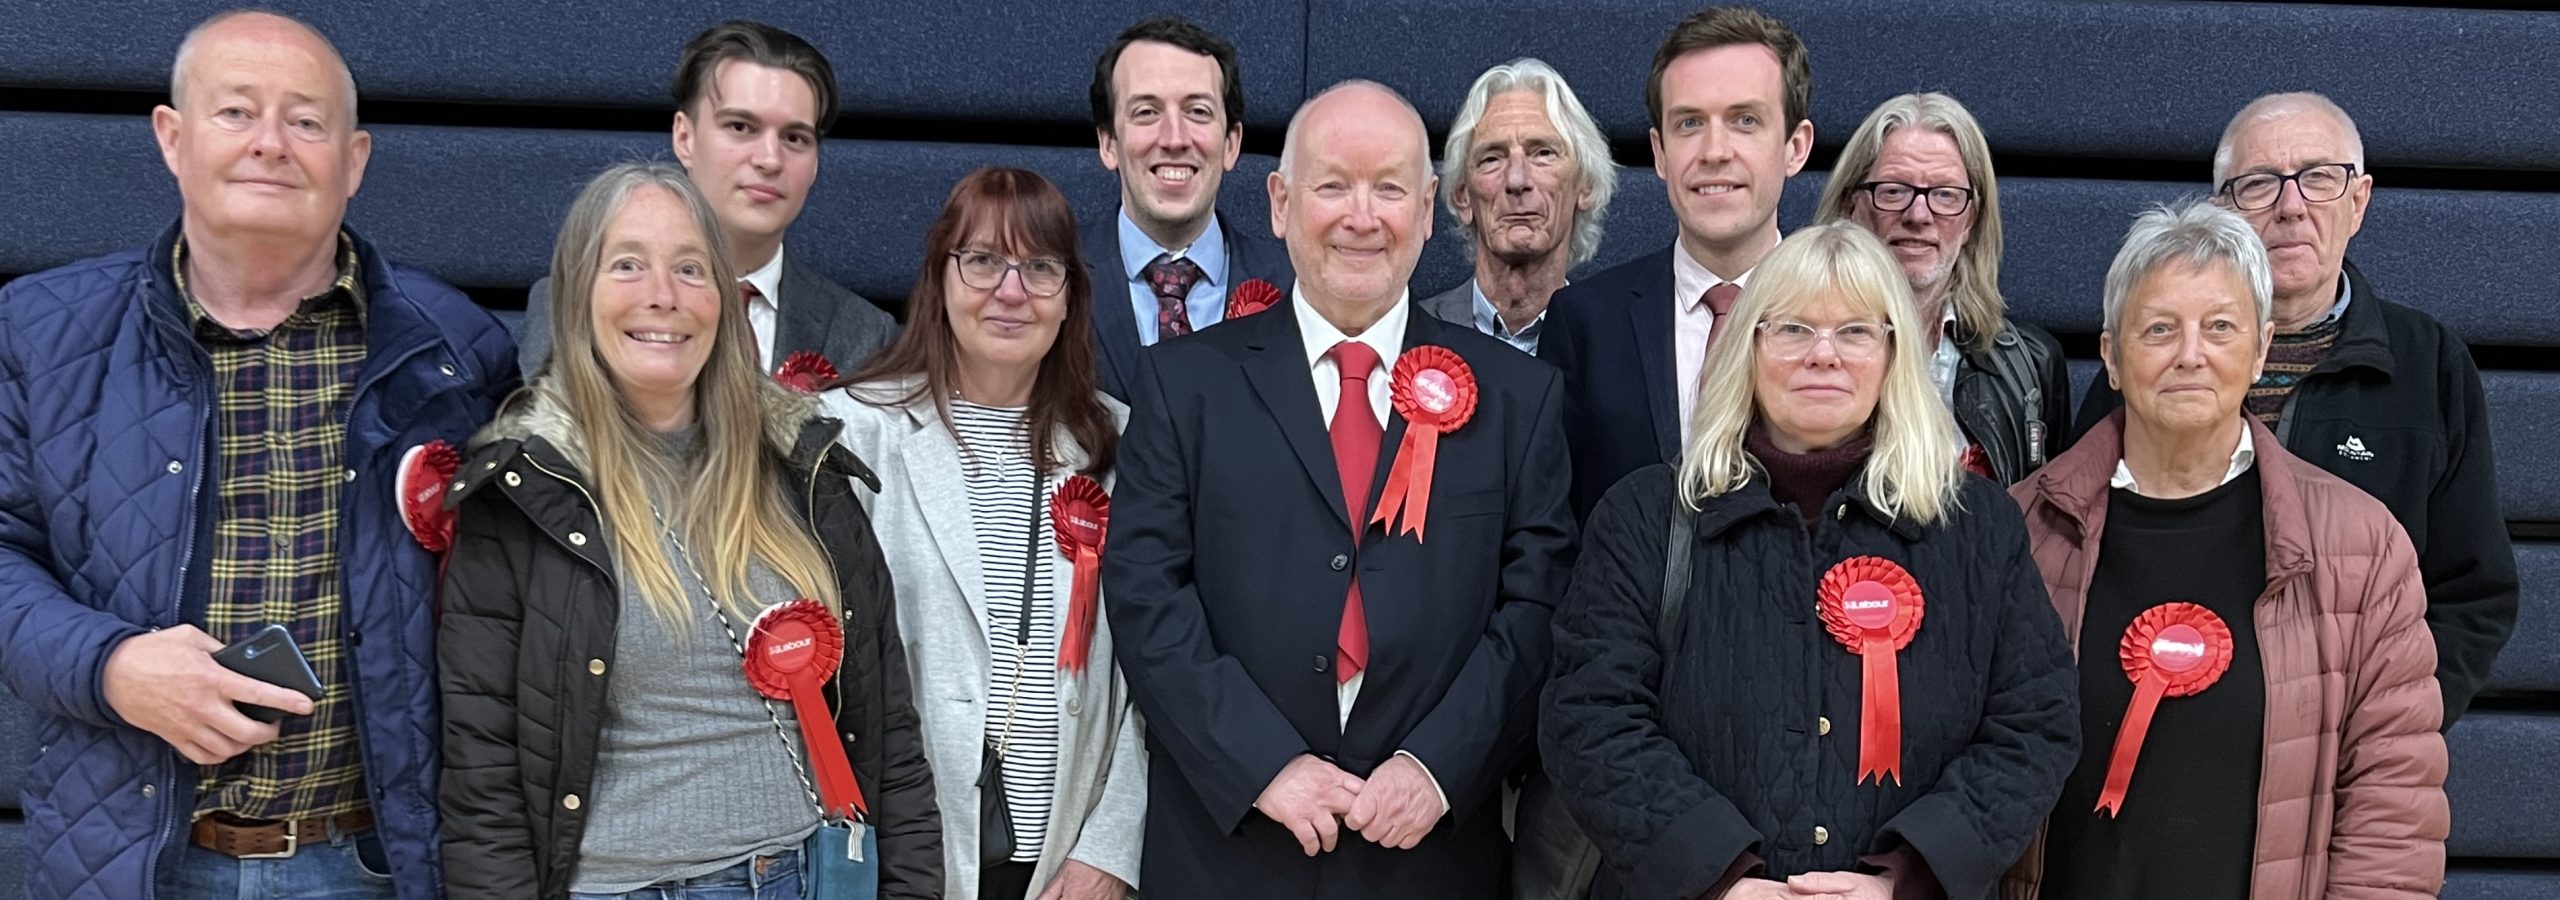 Labour supporters standing in a formal photograph